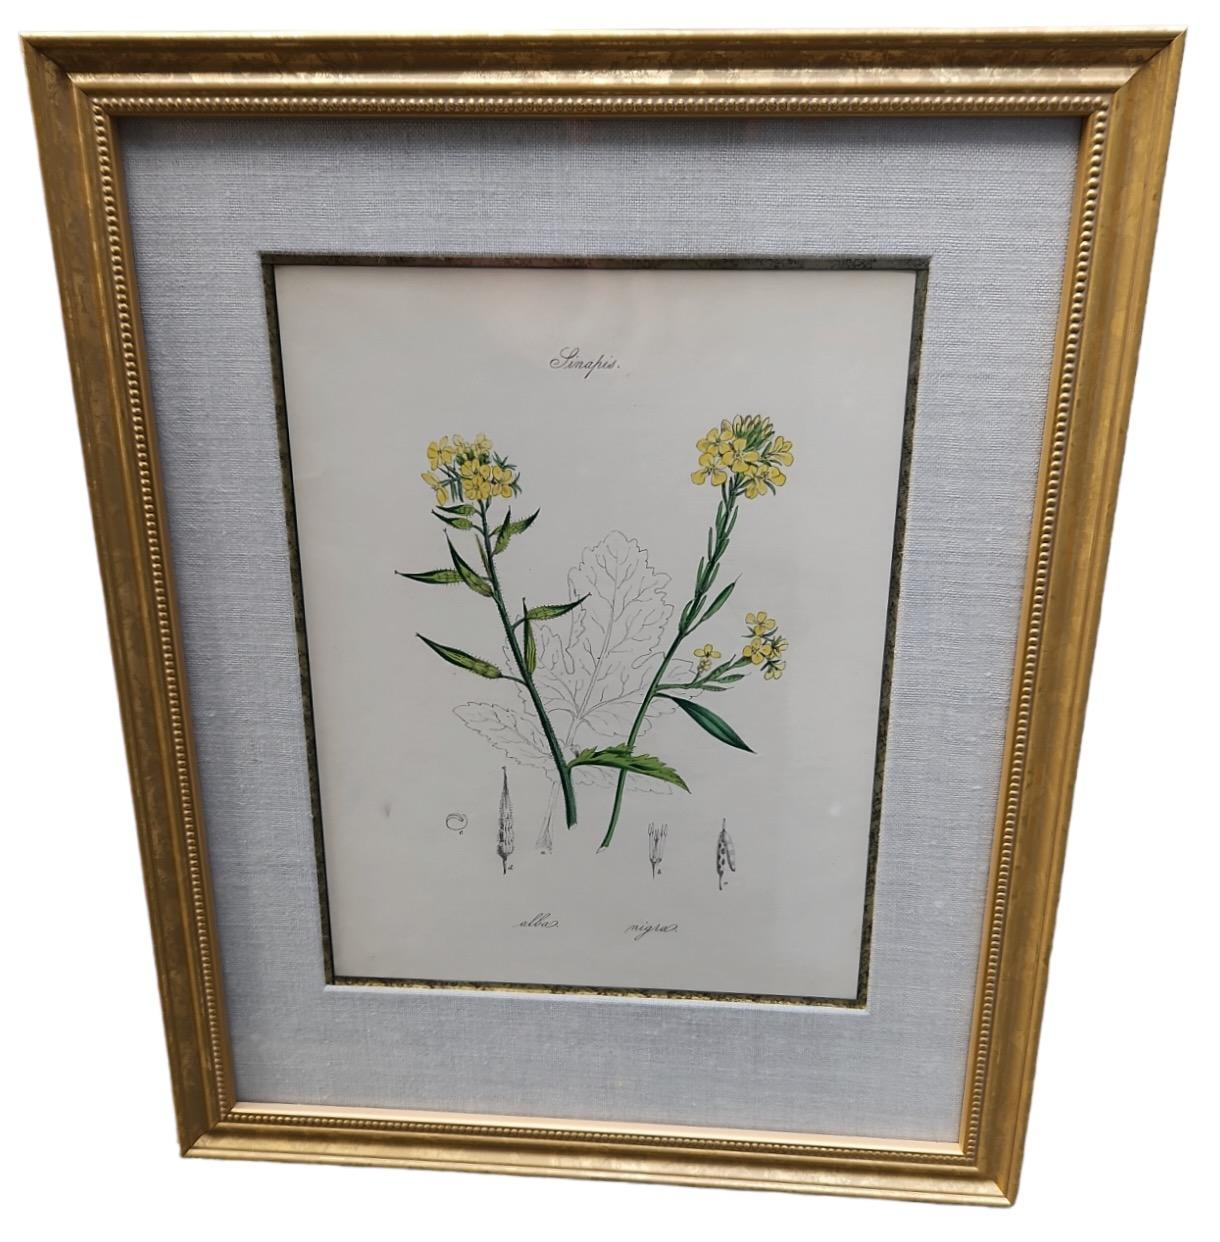 Hand tinted late 19th century botanicals. Finely detailed. Newly framed and matted. Linen matte. Gold metal leaf frames. 19 available.